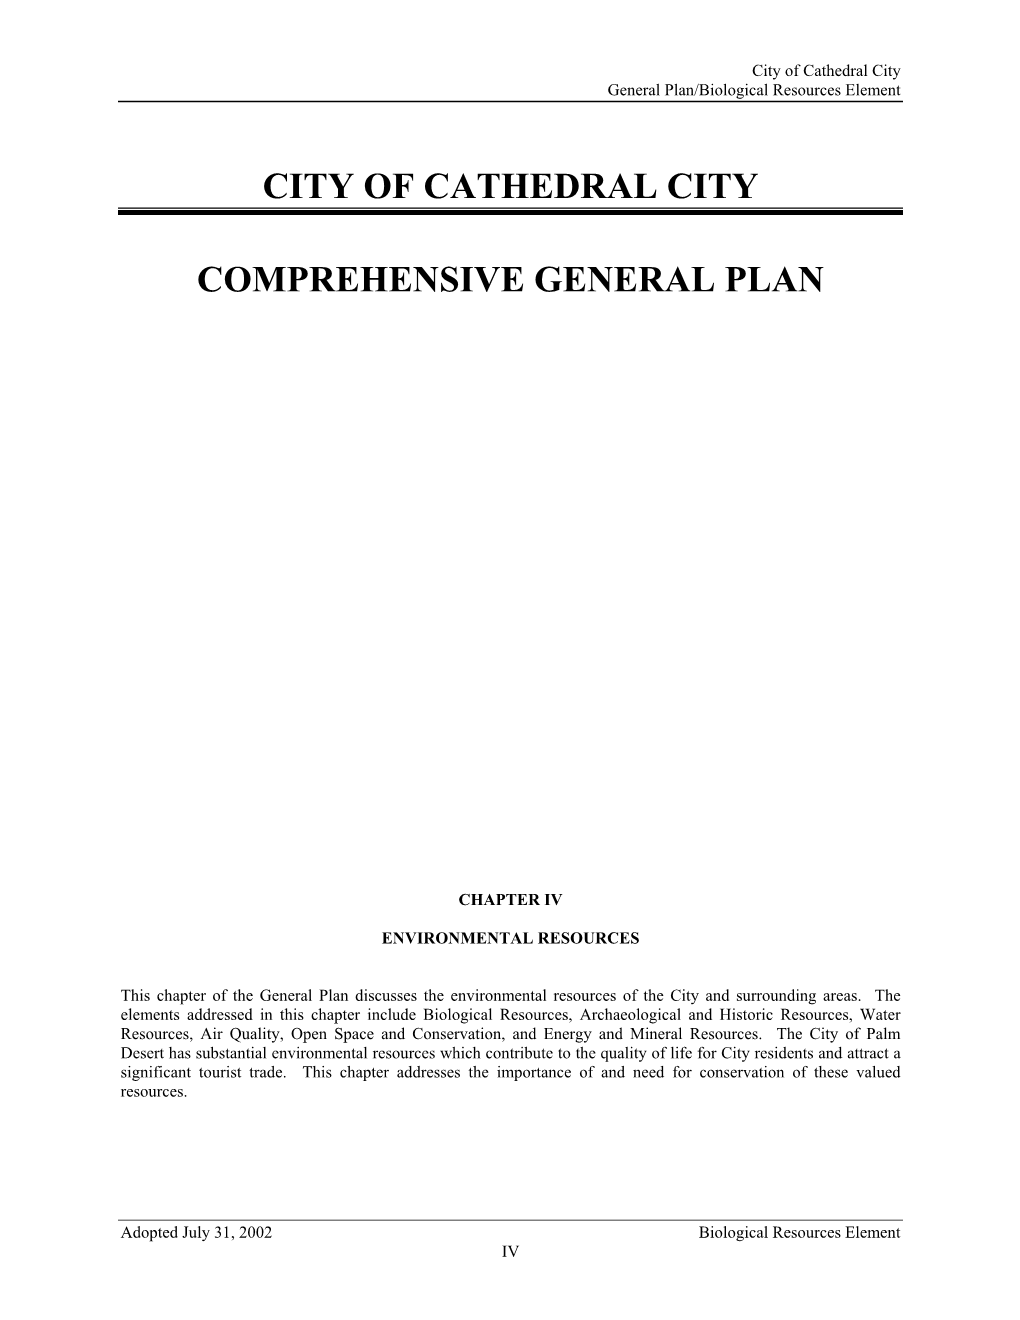 City of Cathedral City Comprehensive General Plan